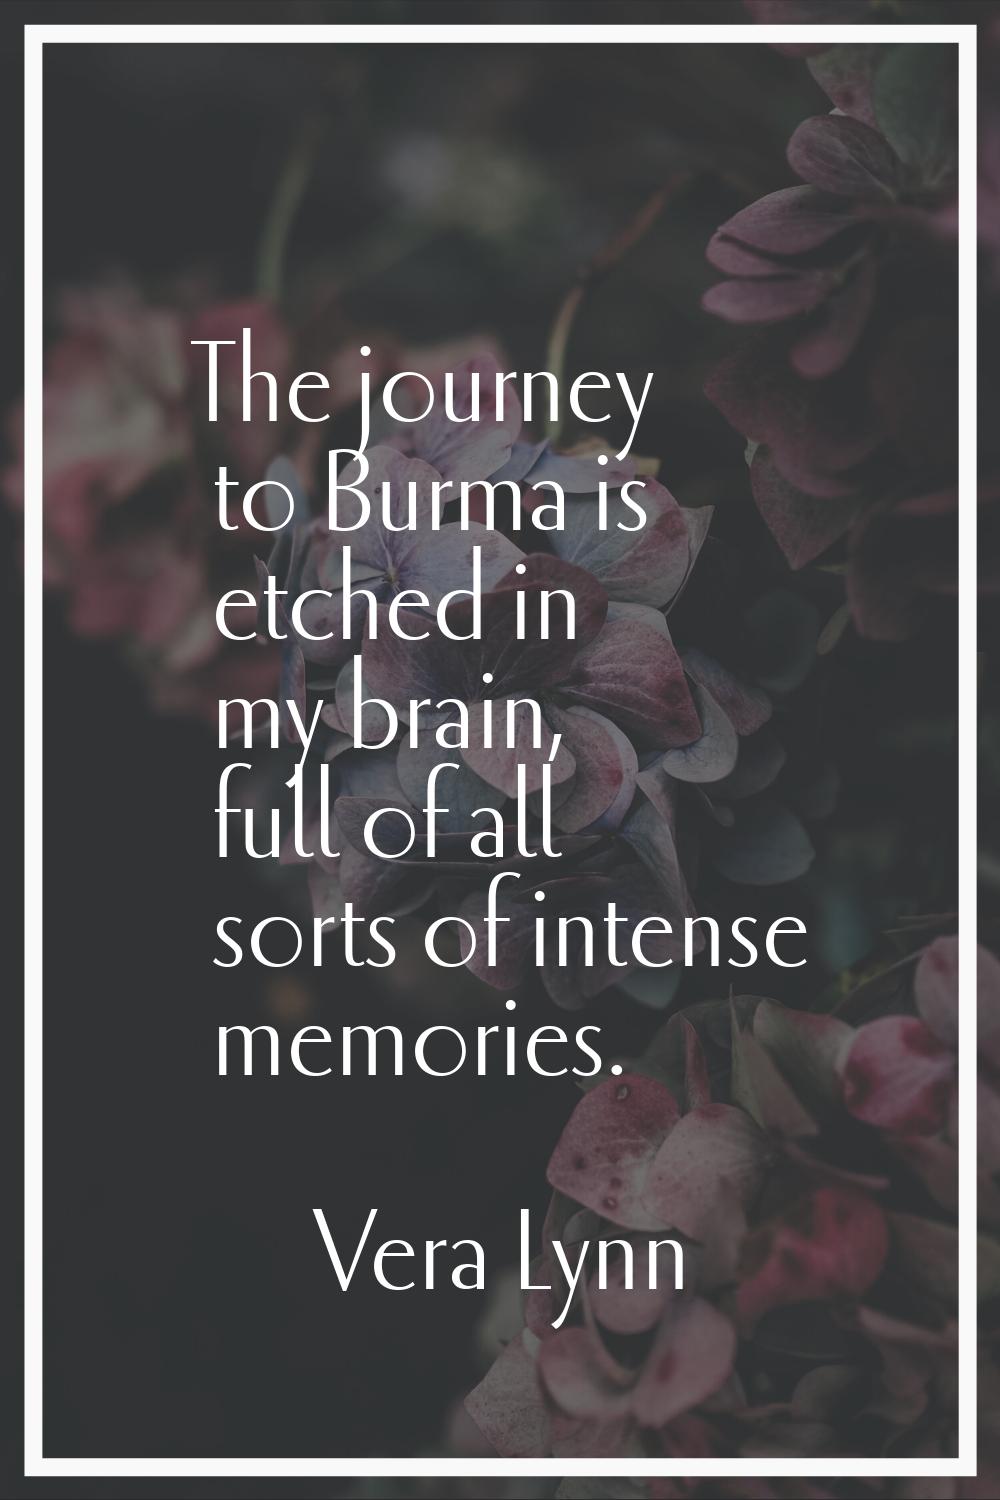 The journey to Burma is etched in my brain, full of all sorts of intense memories.